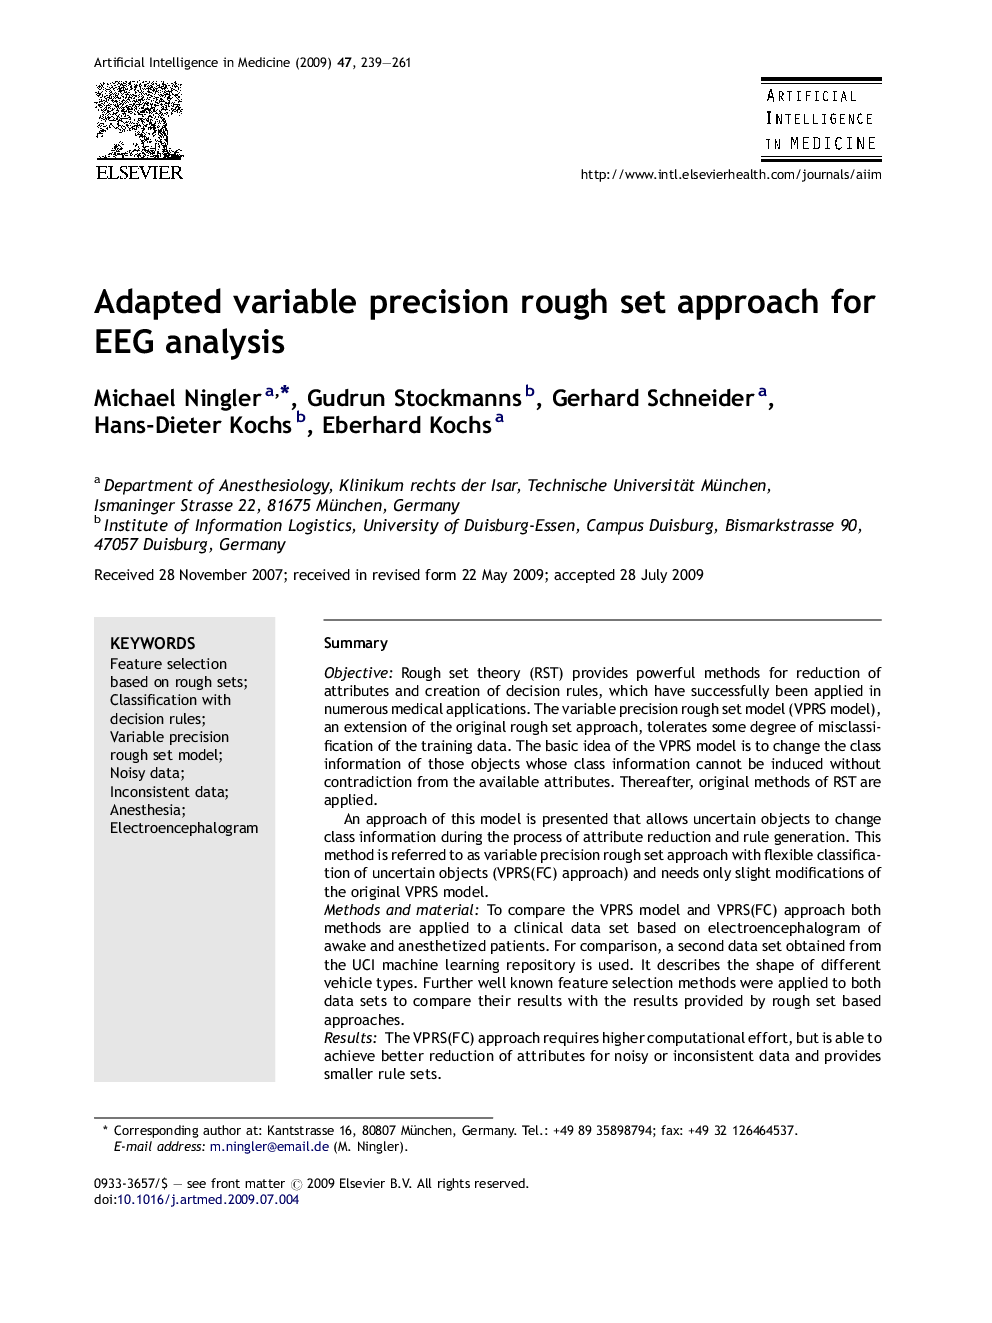 Adapted variable precision rough set approach for EEG analysis